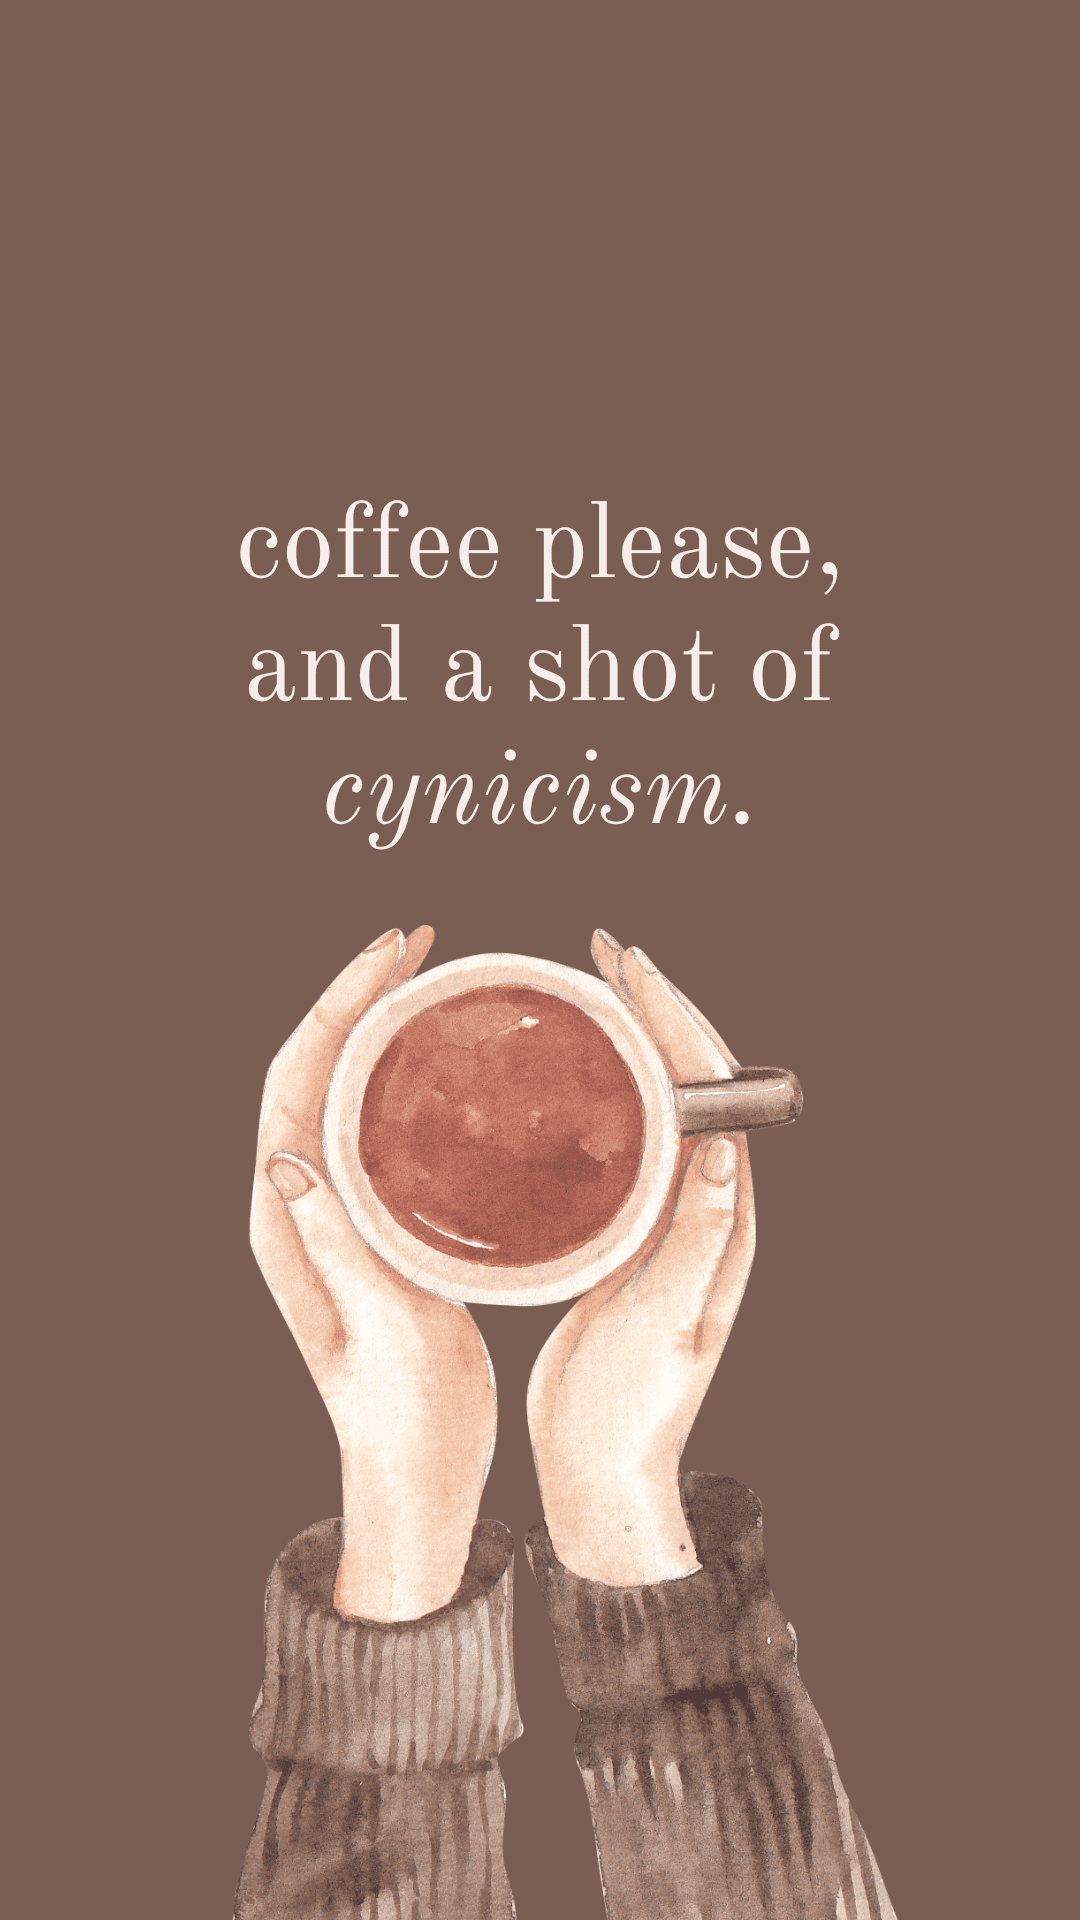 coffee please, and a shot of cynicism. gilmore girls cell phone wallpaper.